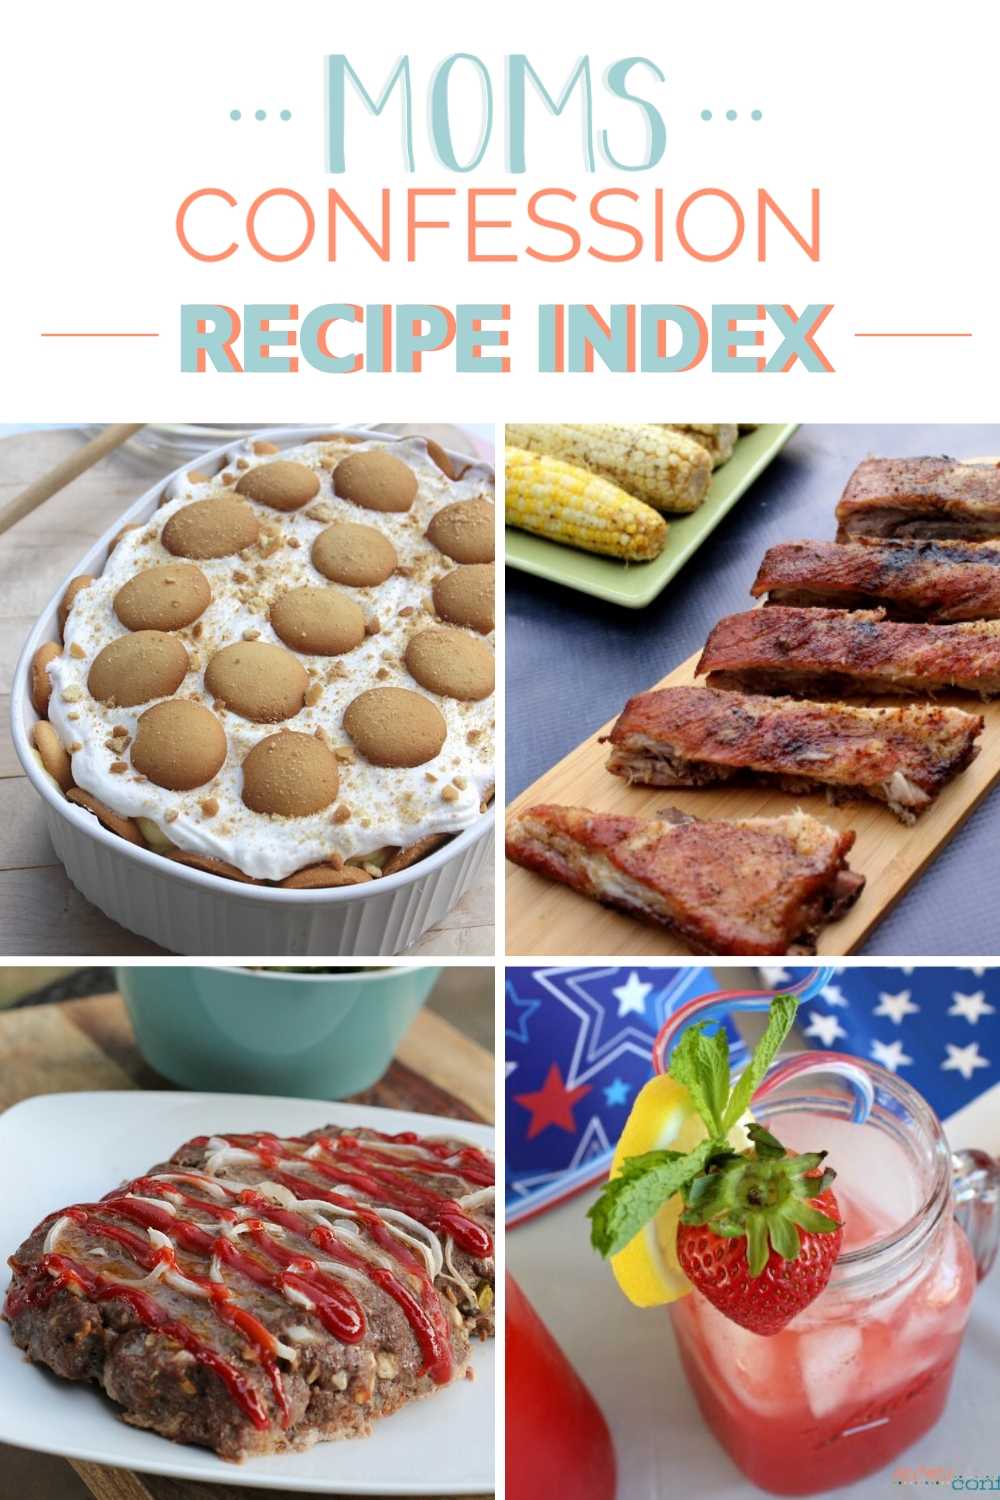 Our recipe index features simple recipes everyone loves! You won't find gourmet recipes, but you'll find easy family recipes to enjoy each day of the week.